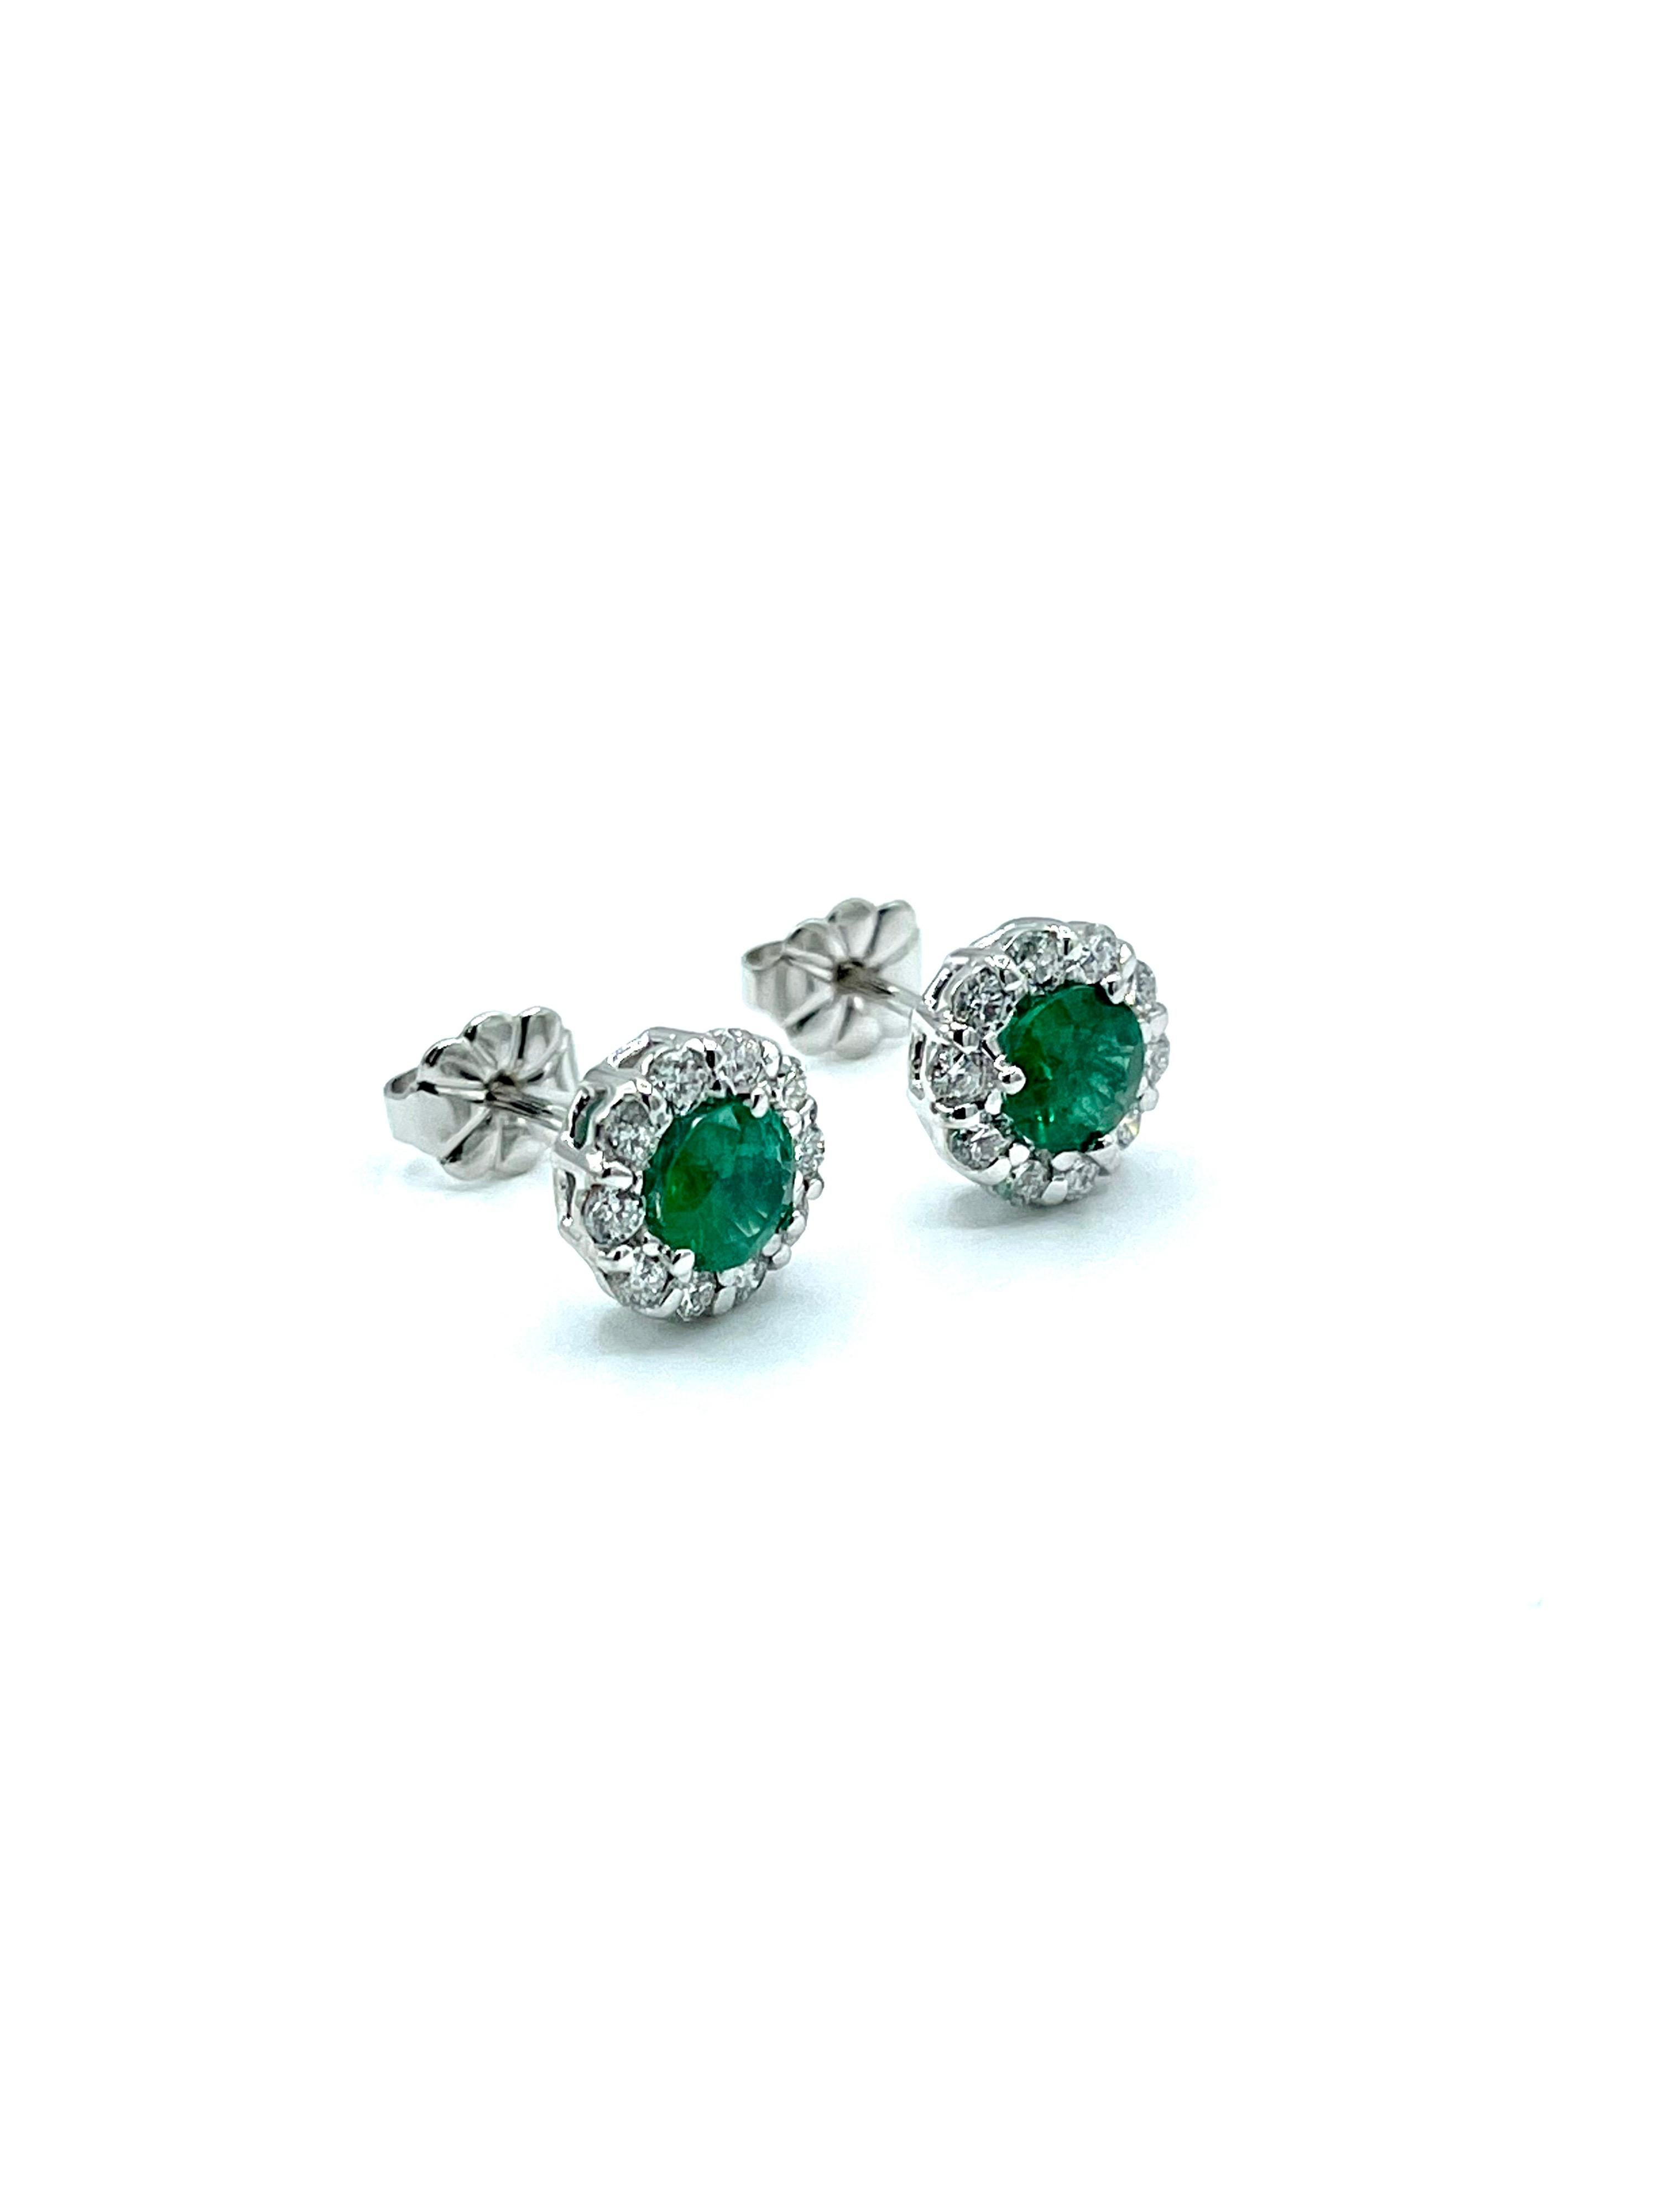 Round Cut 0.75 Carat Round Emerald and Diamond White Gold Stud Earrings